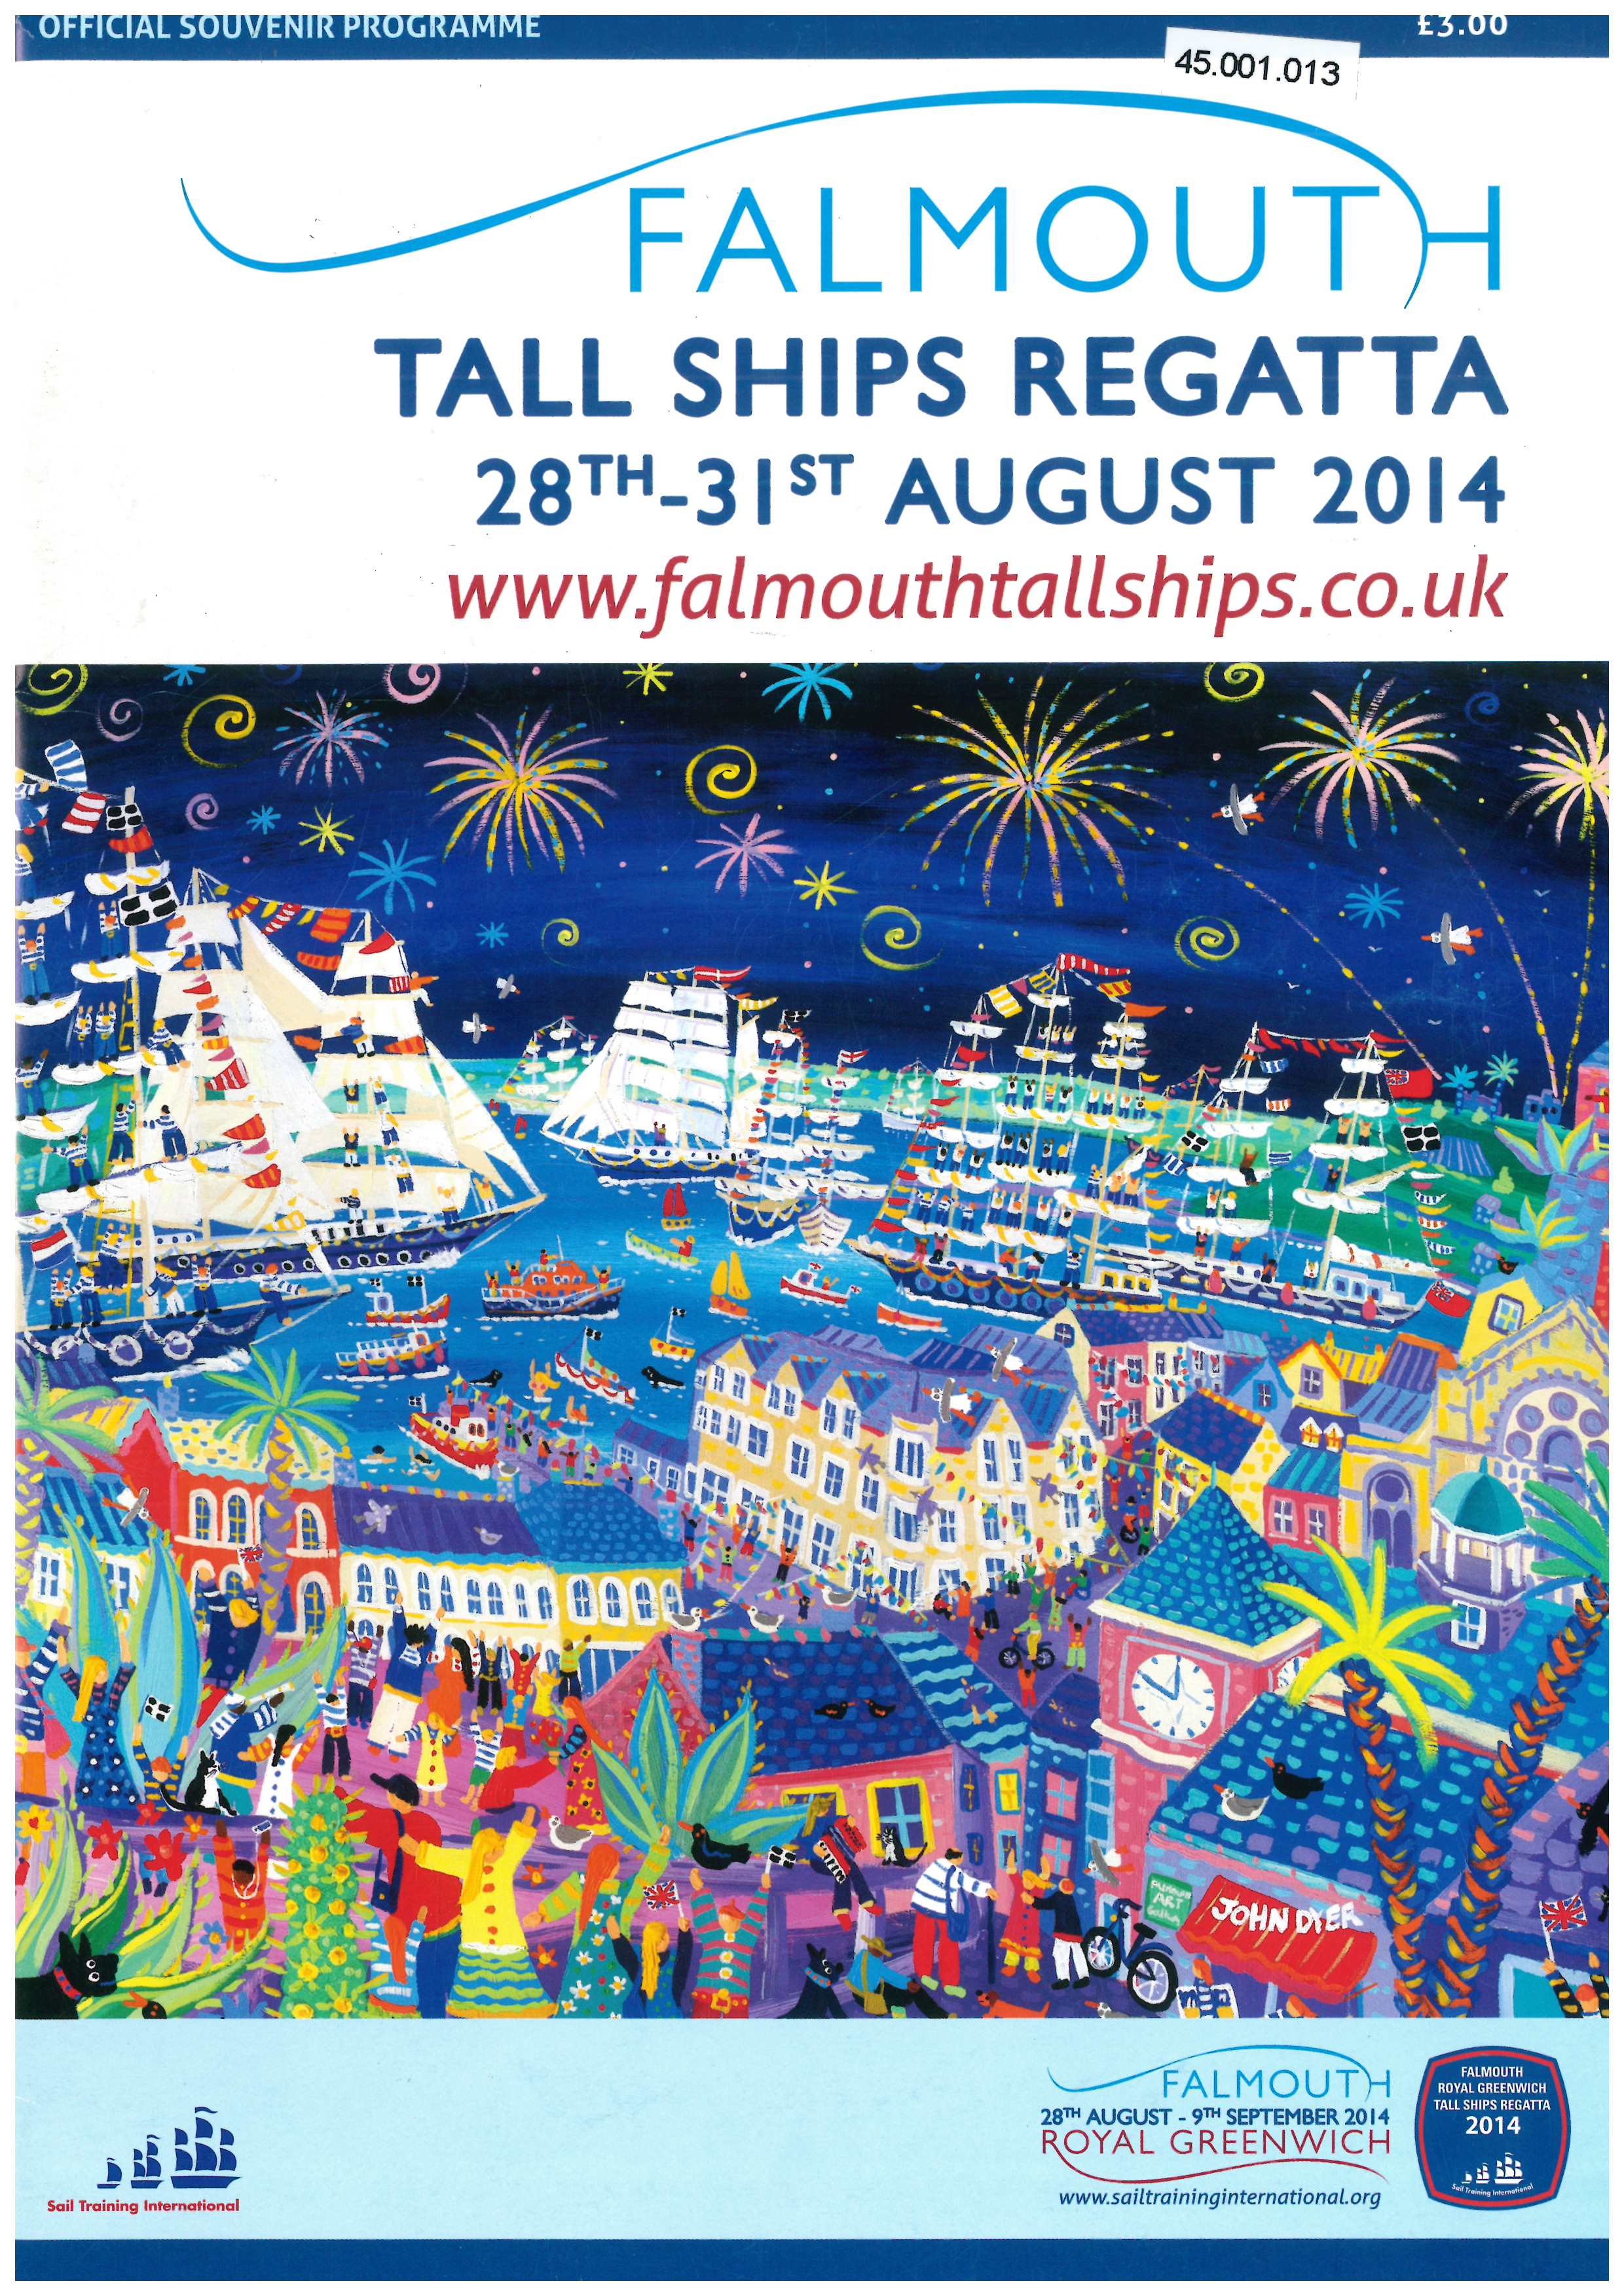 A scan of the official programme for the 2014 Tall Ships Regatta in Falmouth. The scan is of the front colour, which features a brightly coloured illustration of tall ships in Falmouth harbour, with a dark blue night sky and peppered with fireworks.